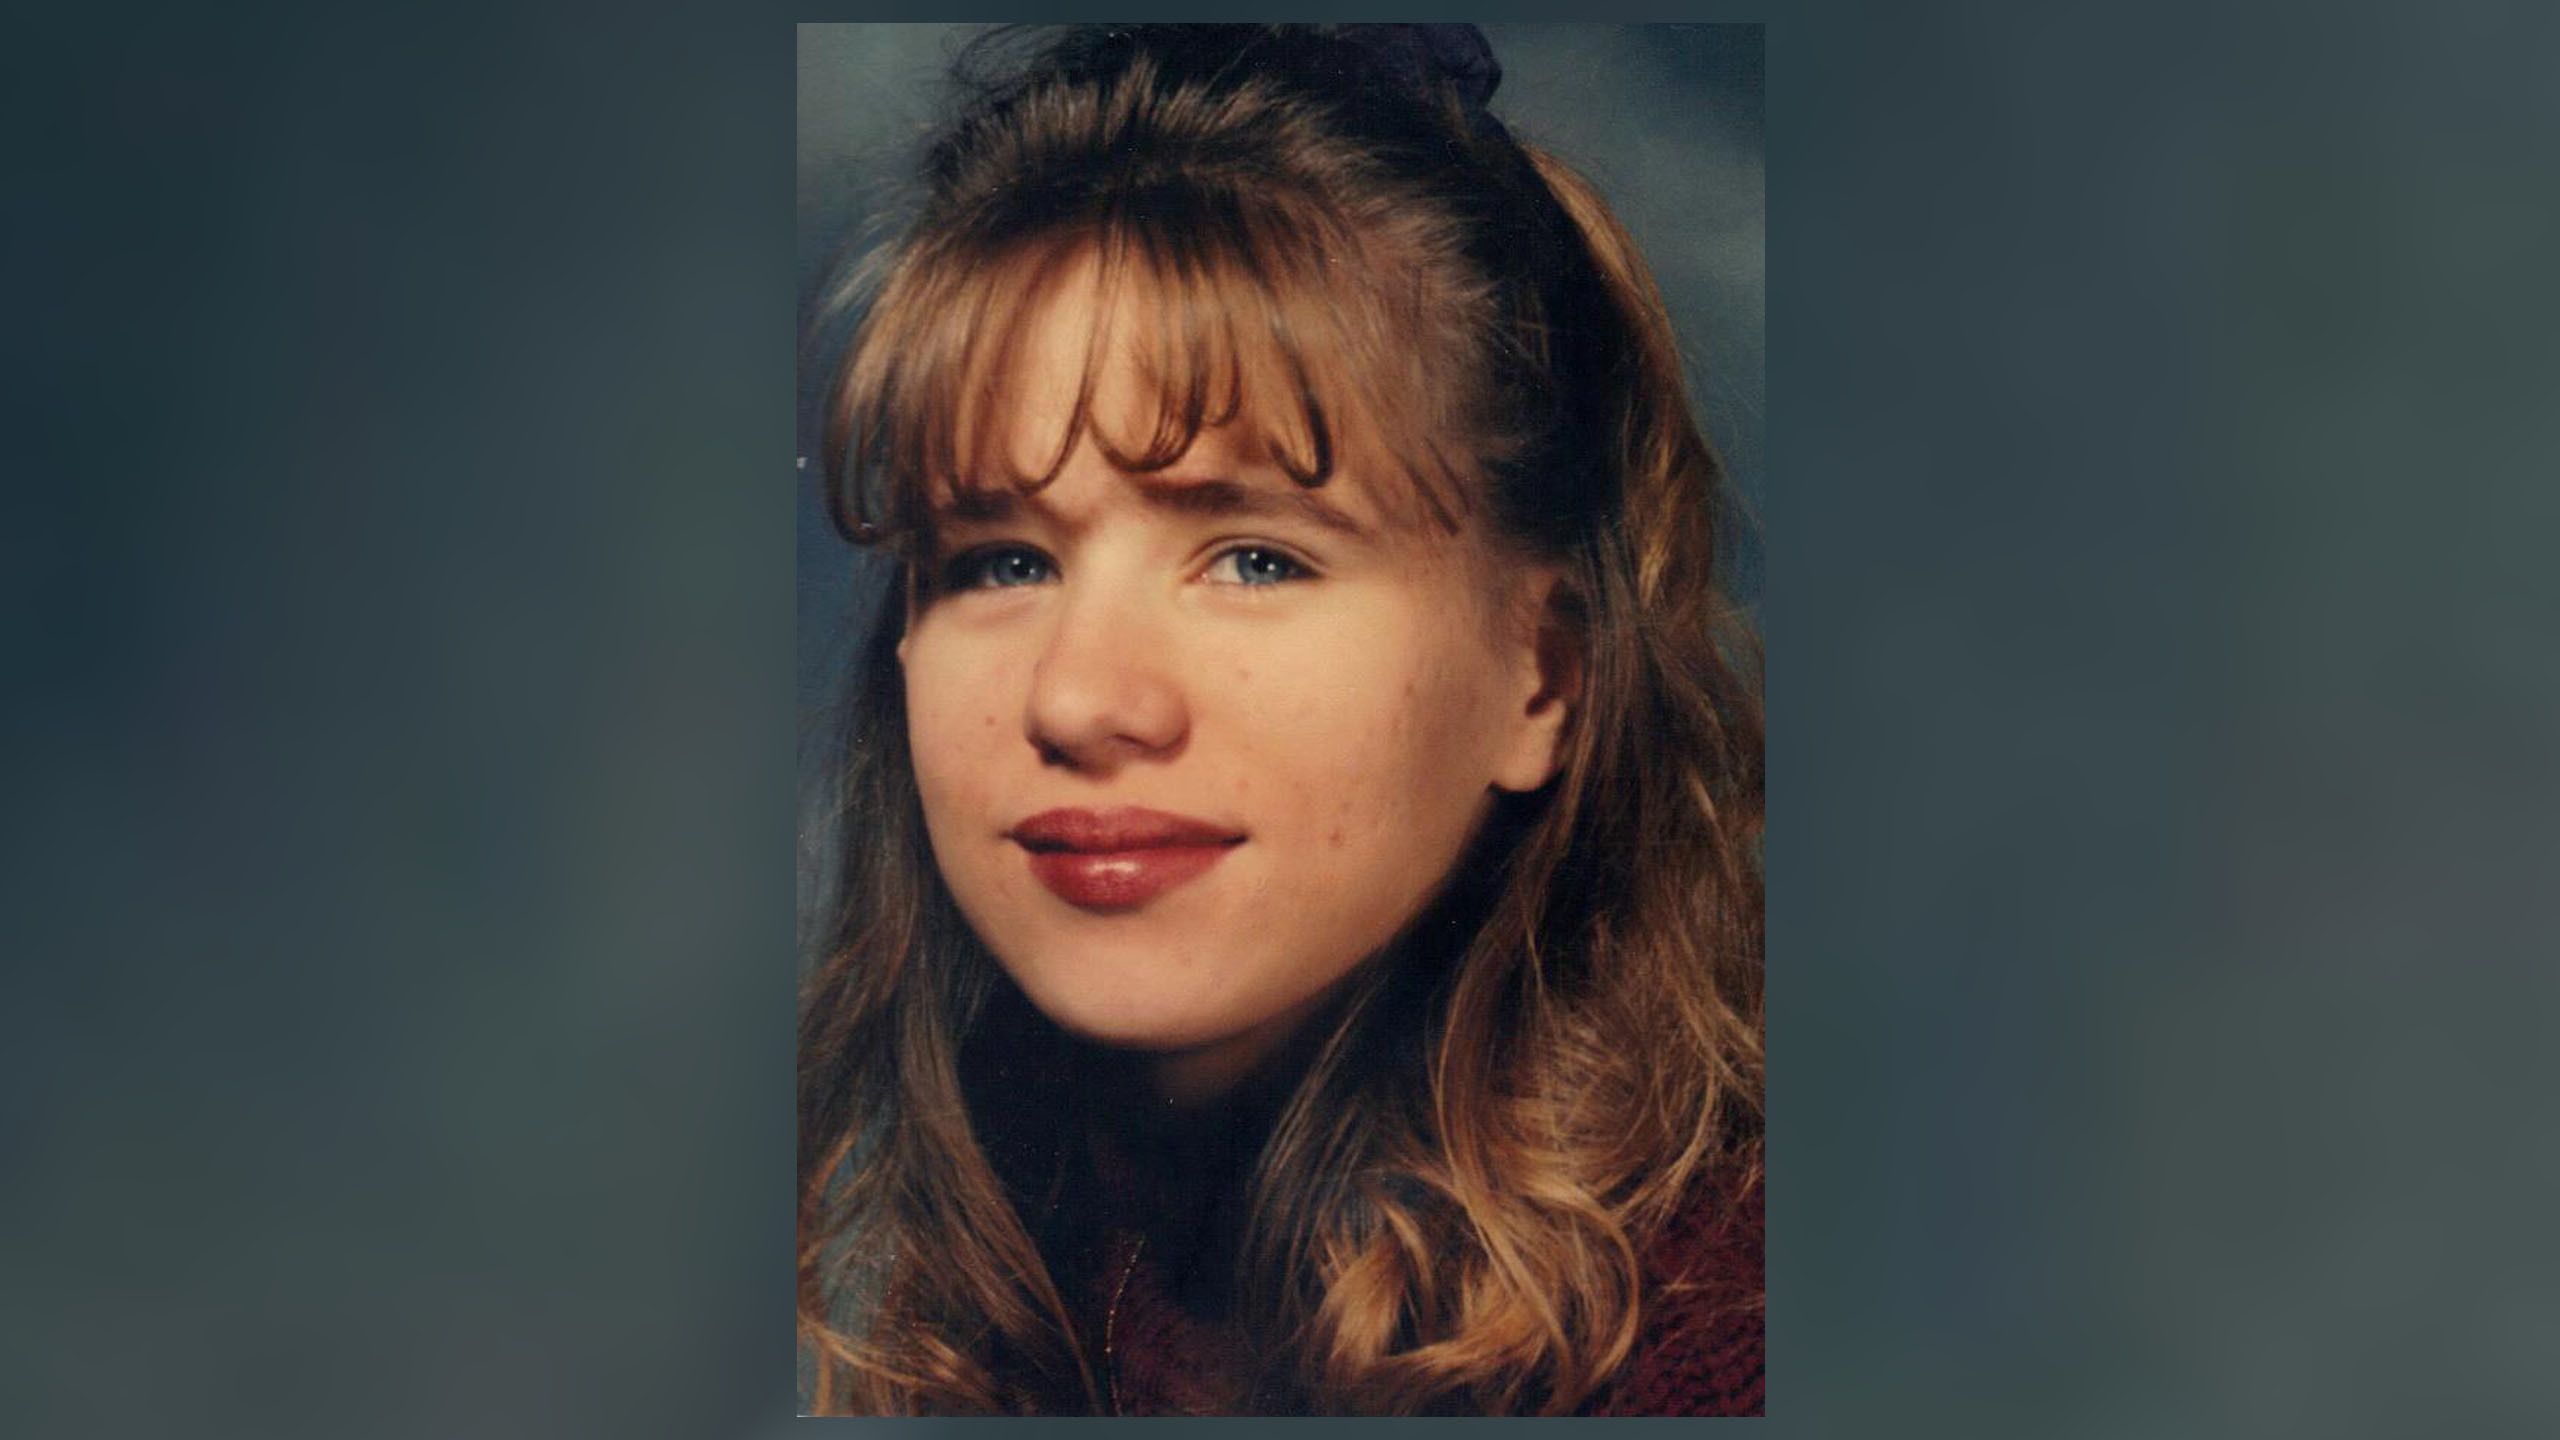 Sherry Leighty's Murder: How a Forensic Anthropologist Helped Solve the Cold Case